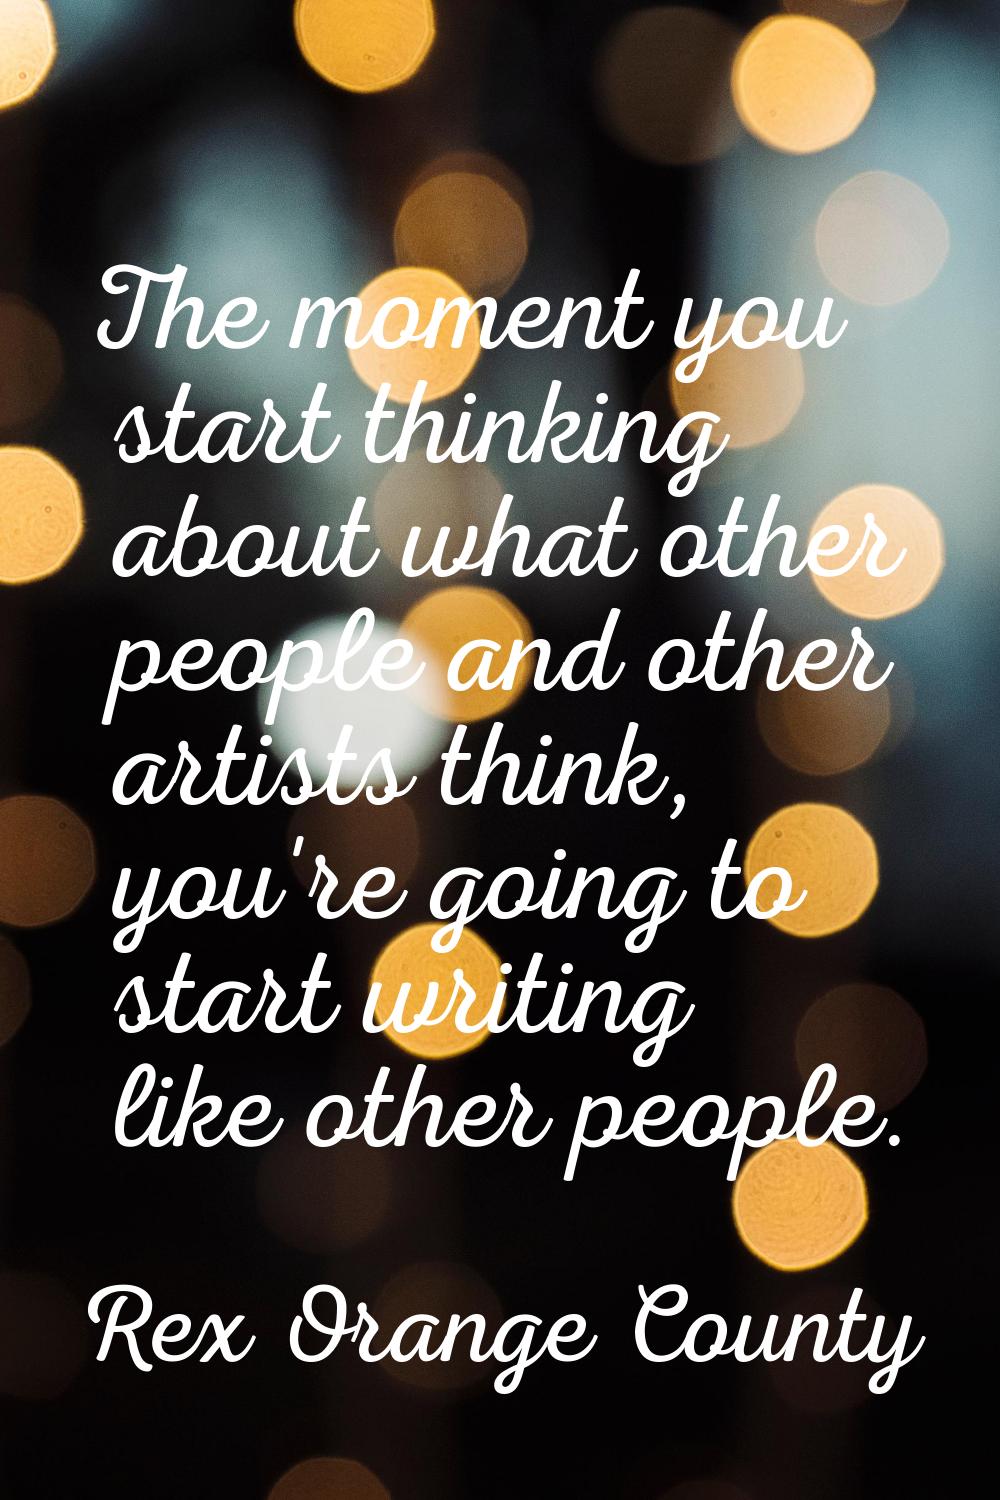 The moment you start thinking about what other people and other artists think, you're going to star